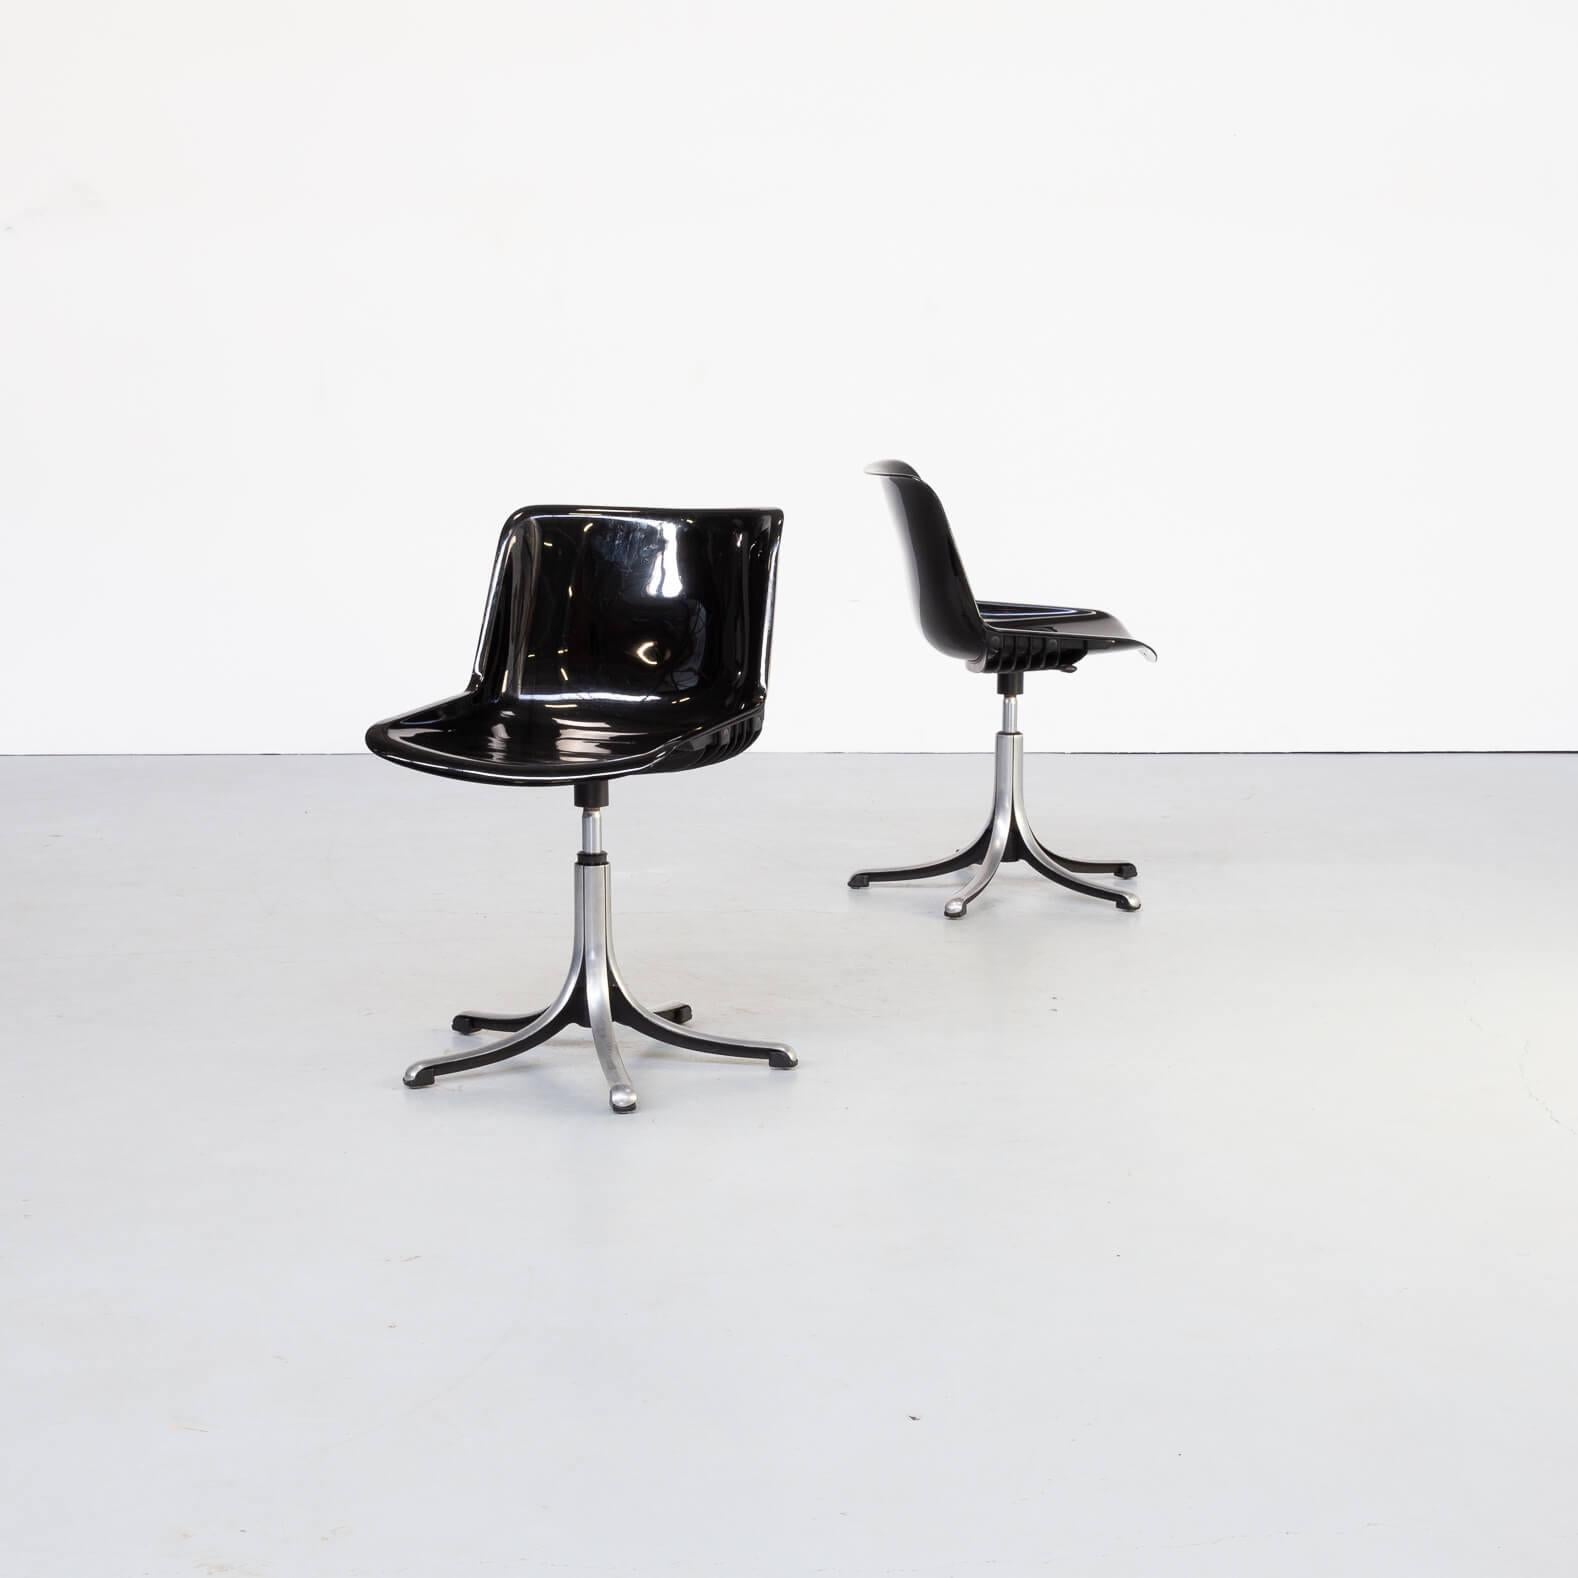 This set of two Tecno chairs is adjustable in height between 70 and 83,5cm. Seating height is about 39 – 52cm. Set in good condition consistent with age and use.